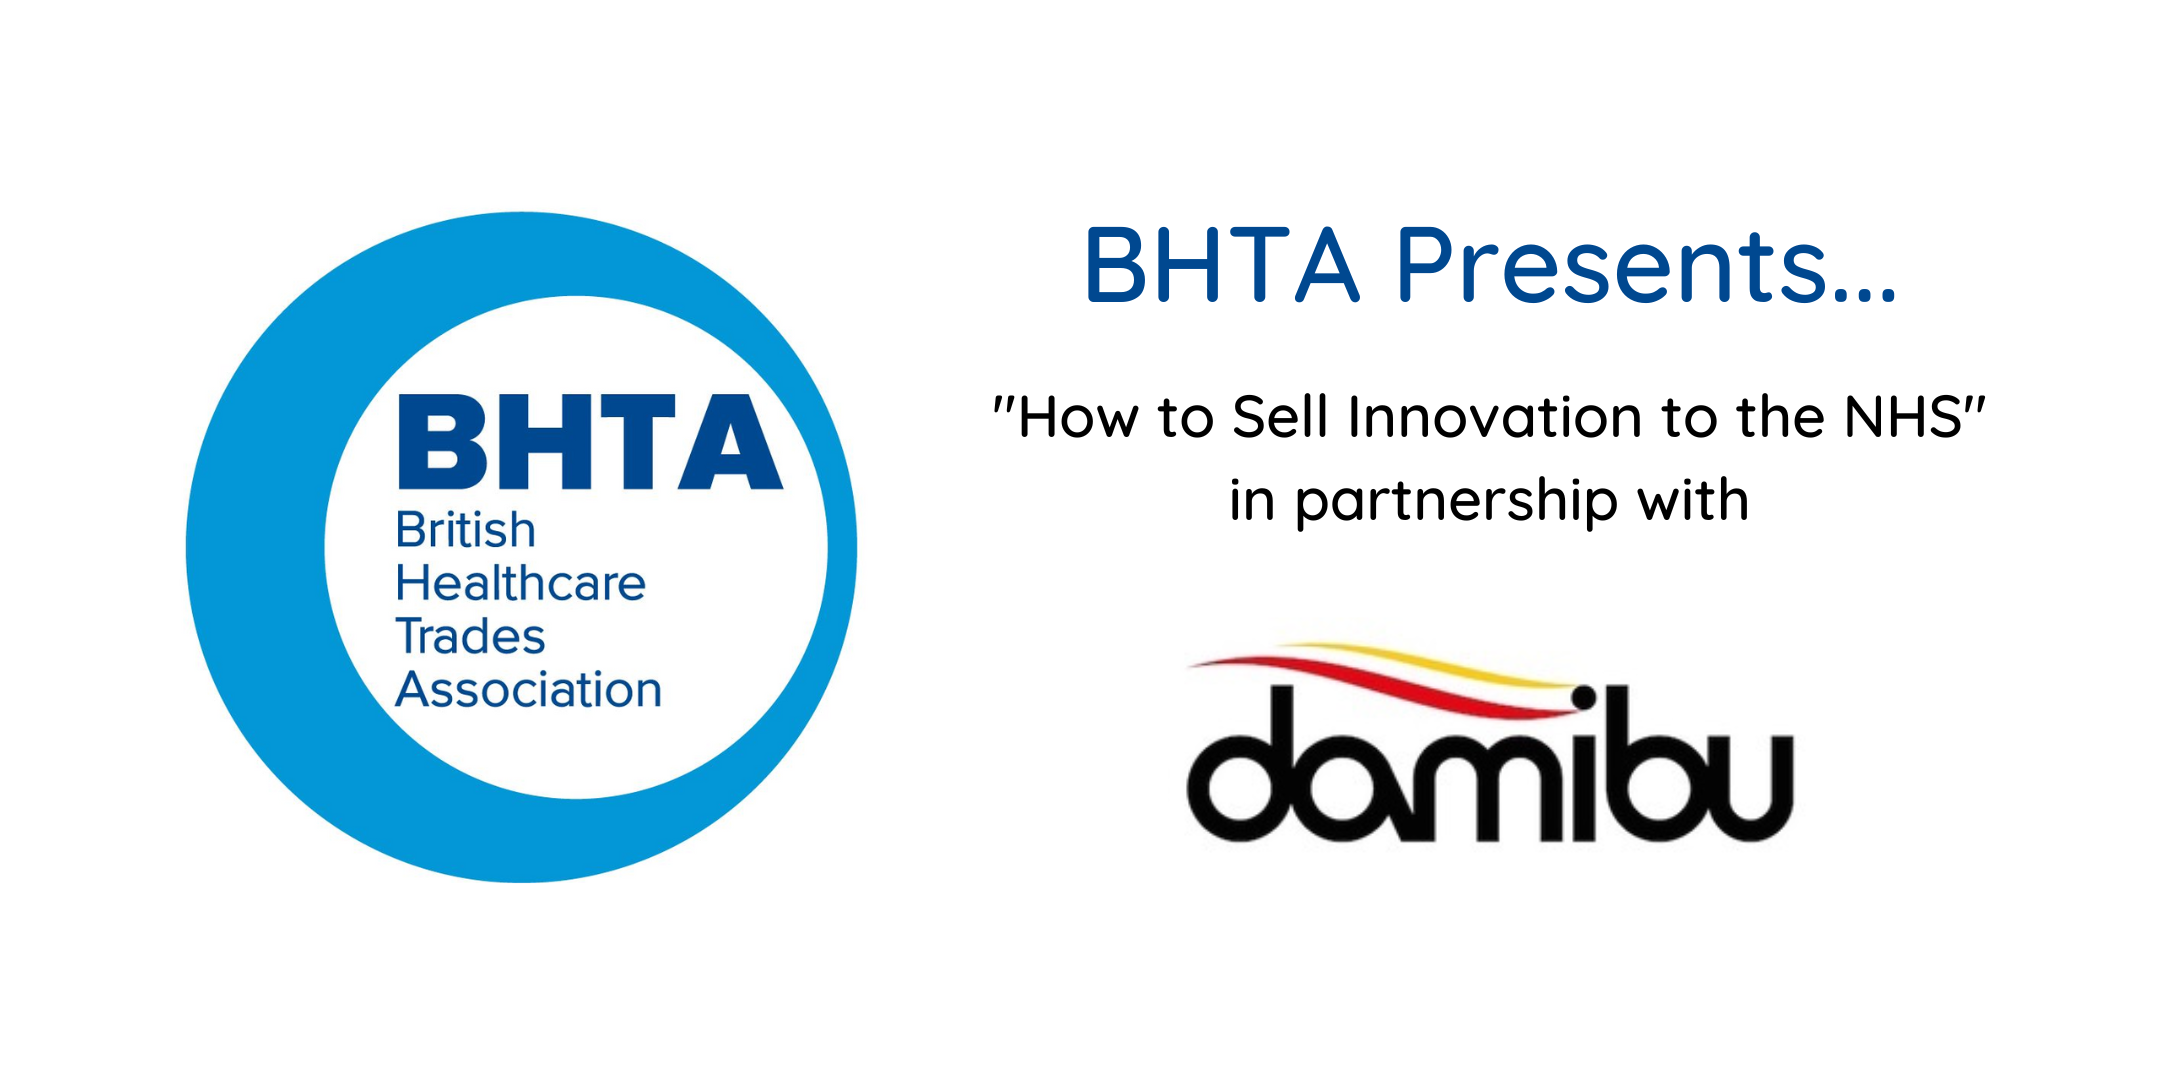 BHTA presents… "How to Sell Innovation to the NHS"